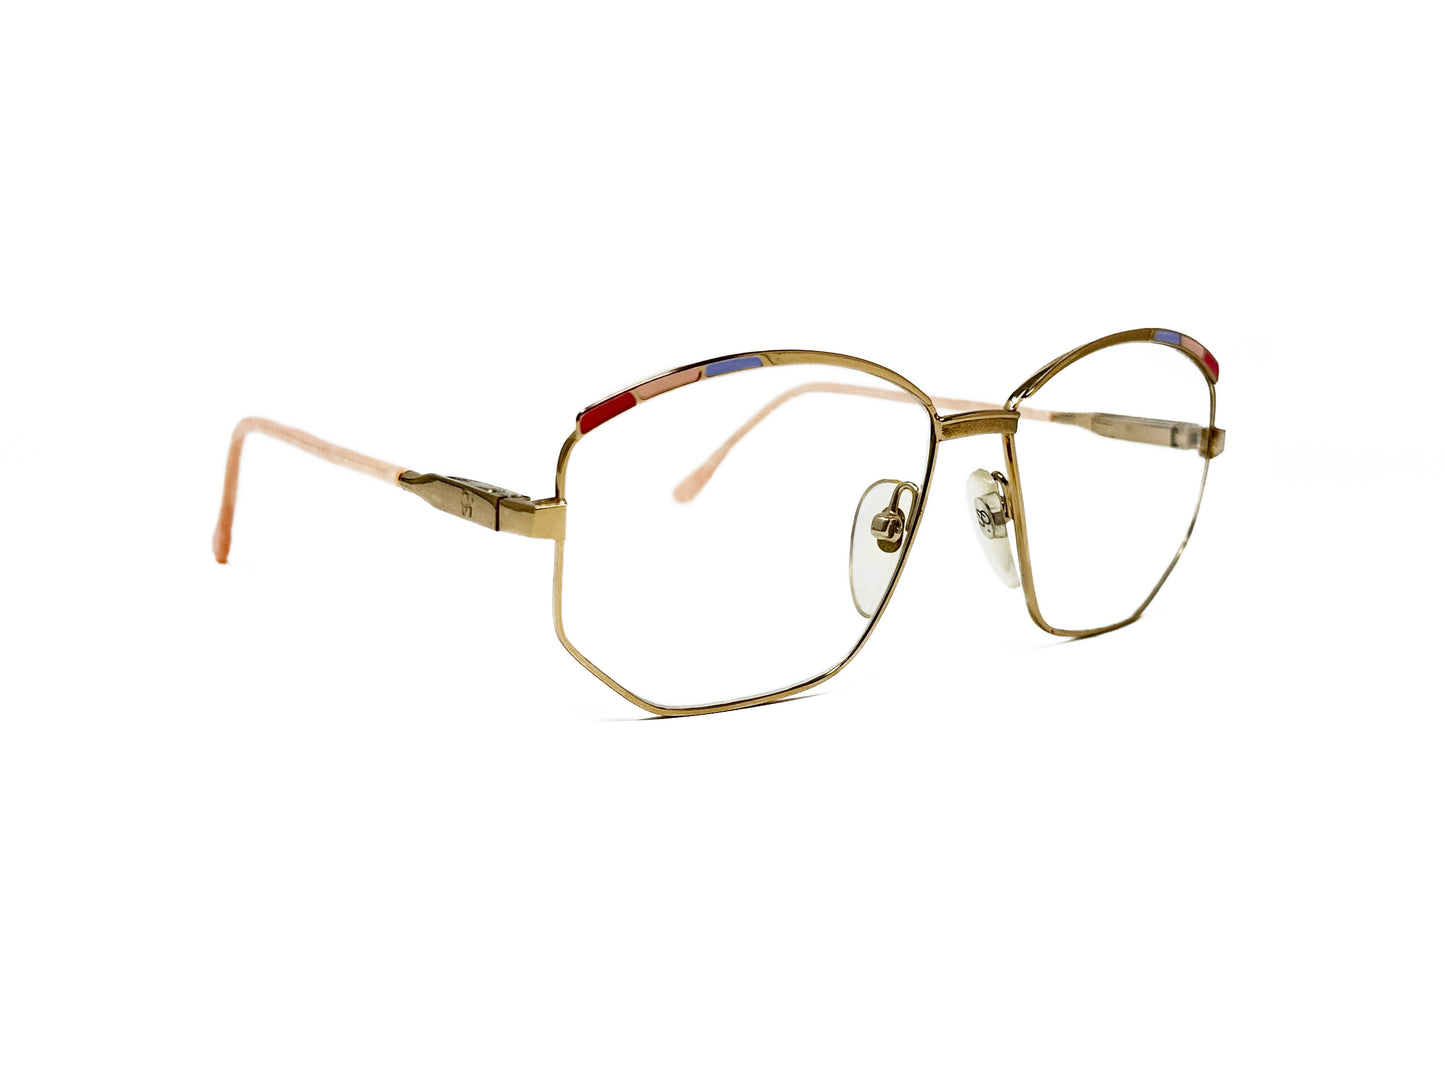 Zollitsch angled-butterfly, metal optical frame. Model: 527. Color: Gold - Gold metal with blue,pink, and red accents on top right corner of frame. Side view.